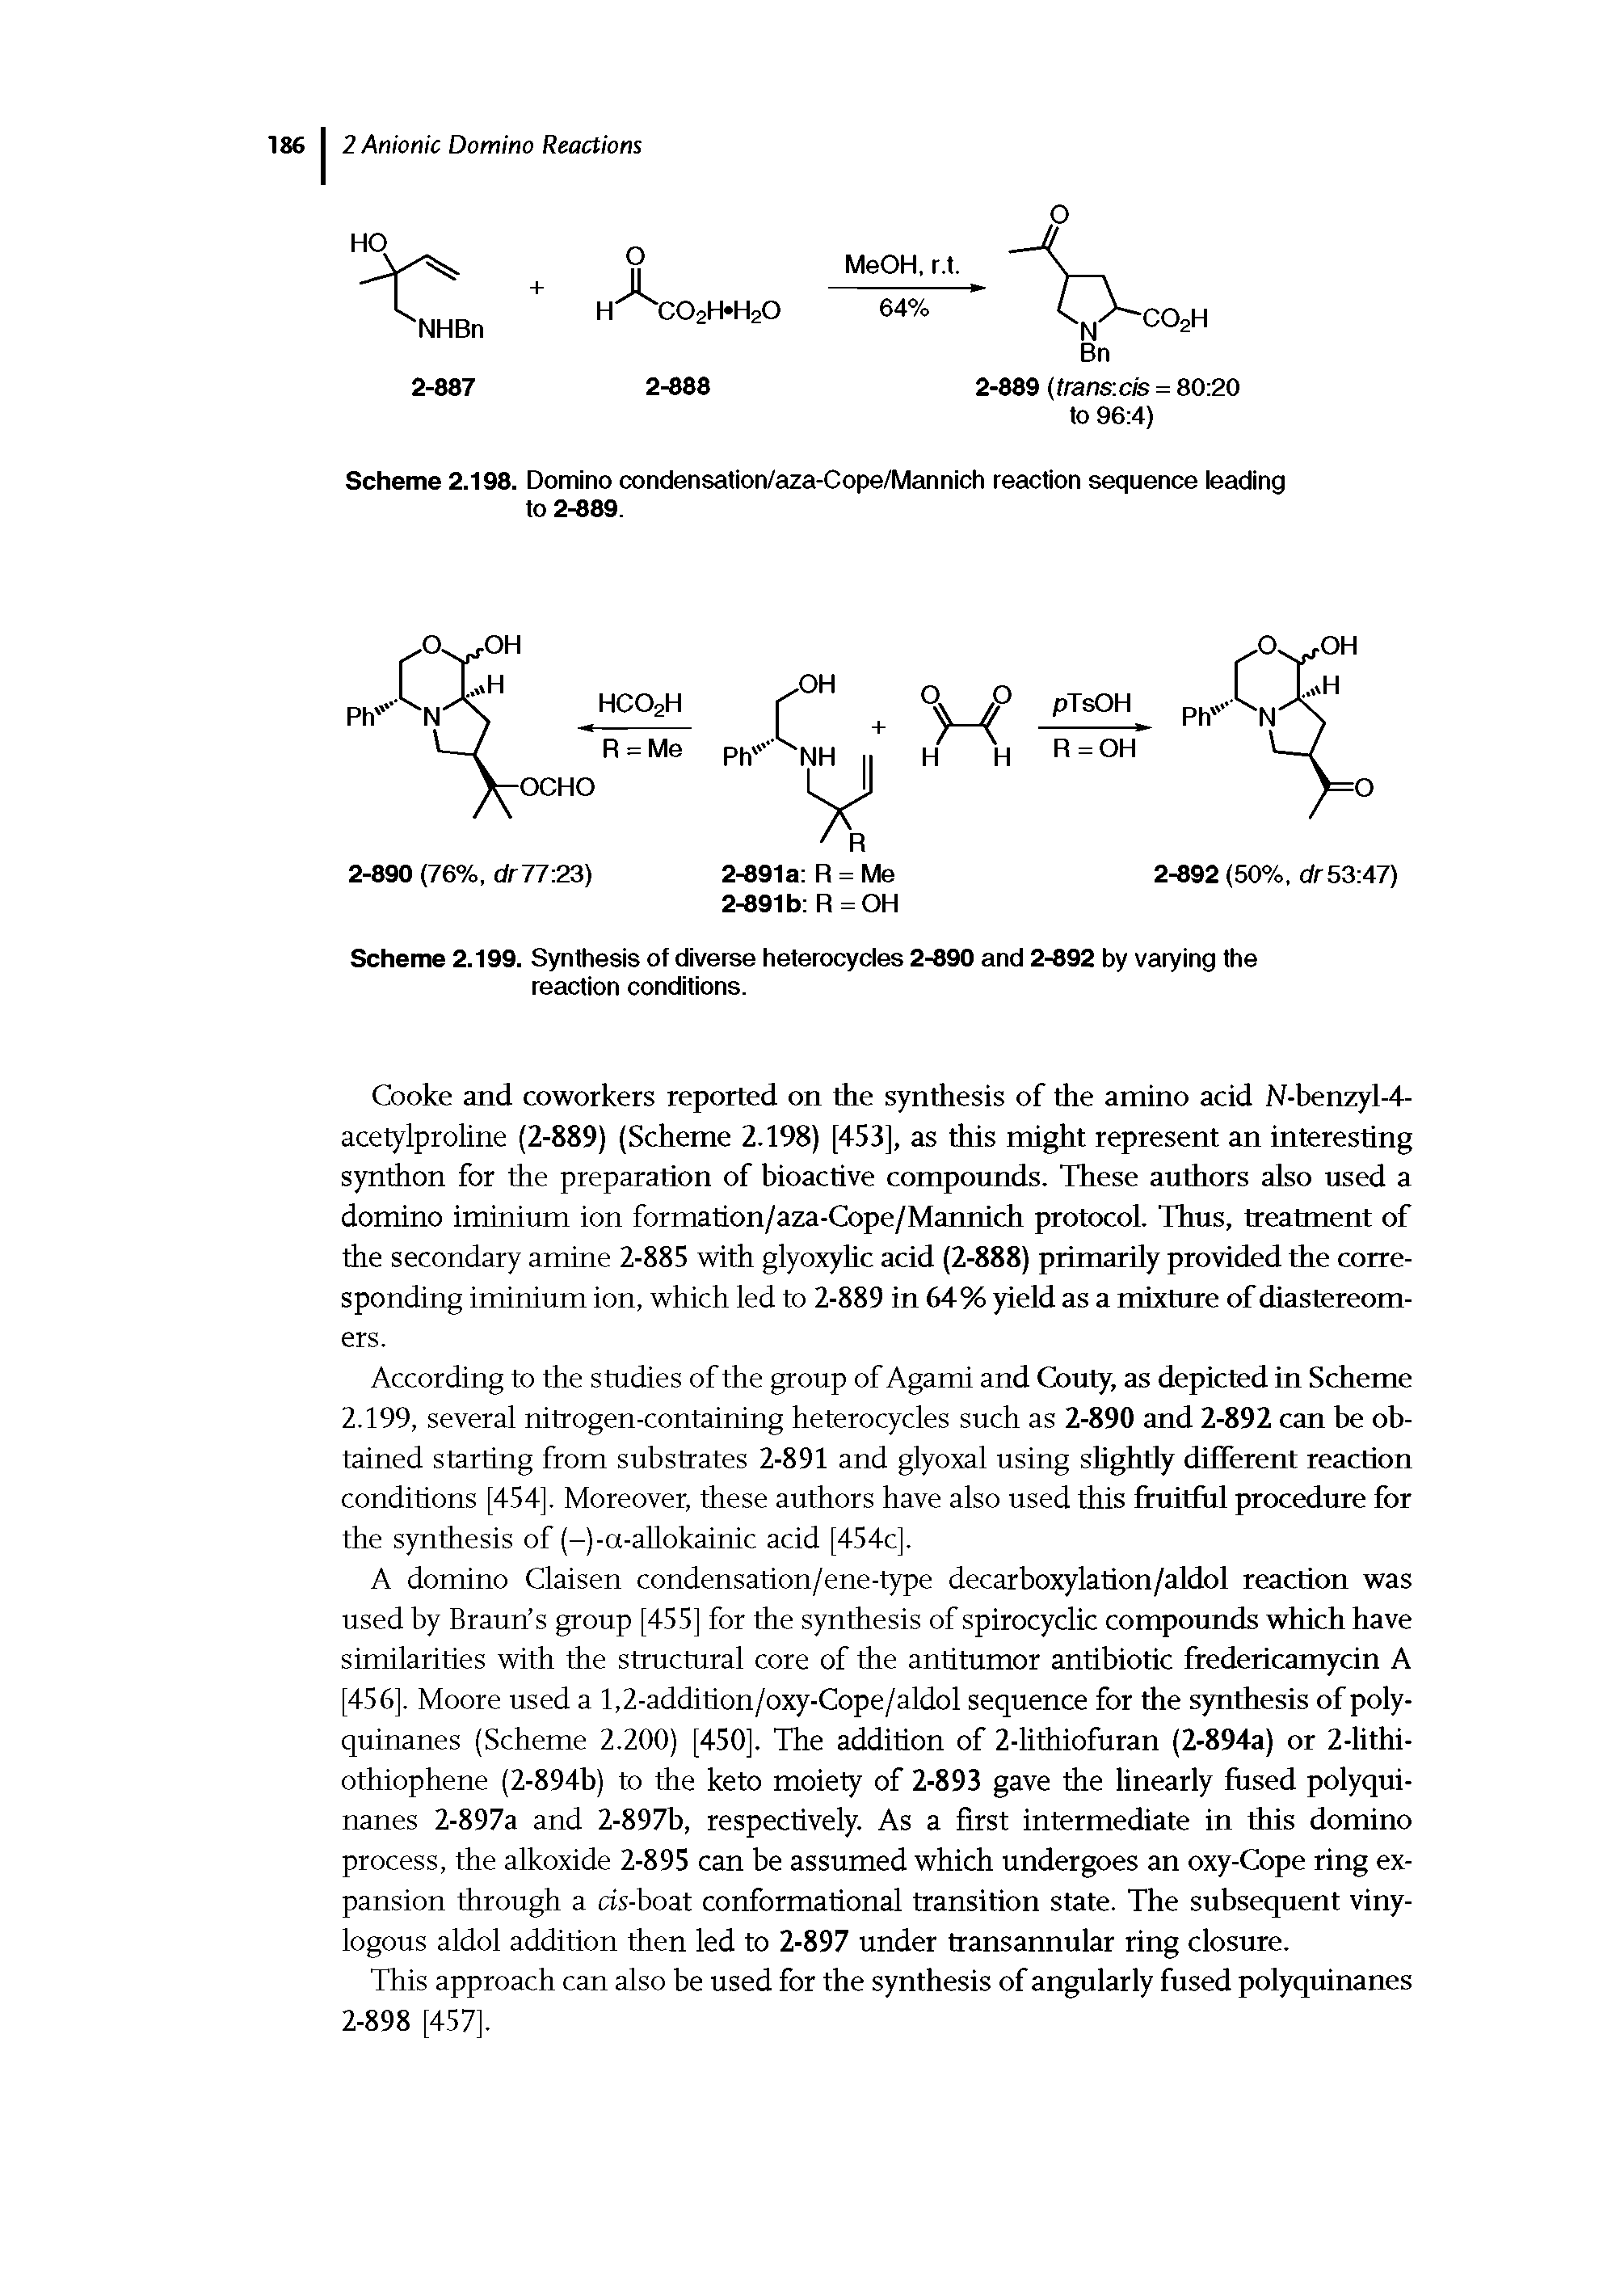 Scheme 2.198. Domino condensation/aza-Cope/Mannich reaction sequence leading to 2-889.